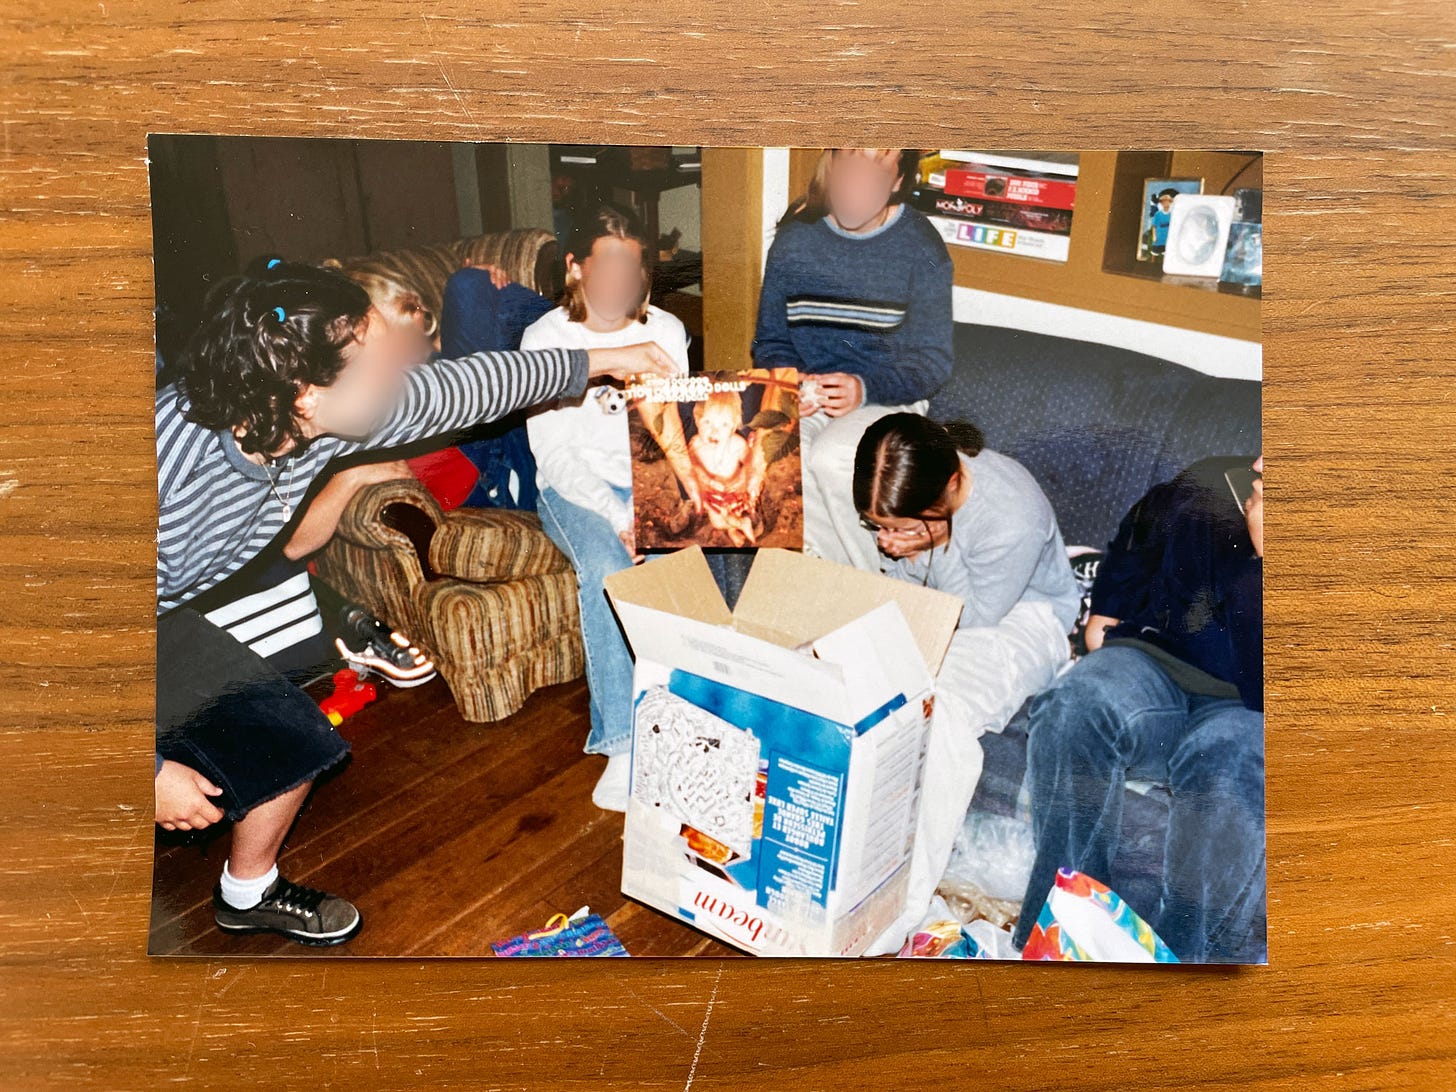 6 people sitting in a living room around a breadmaker box, one person is crying, one person is holding an autograph from the Goo Goo Dolls